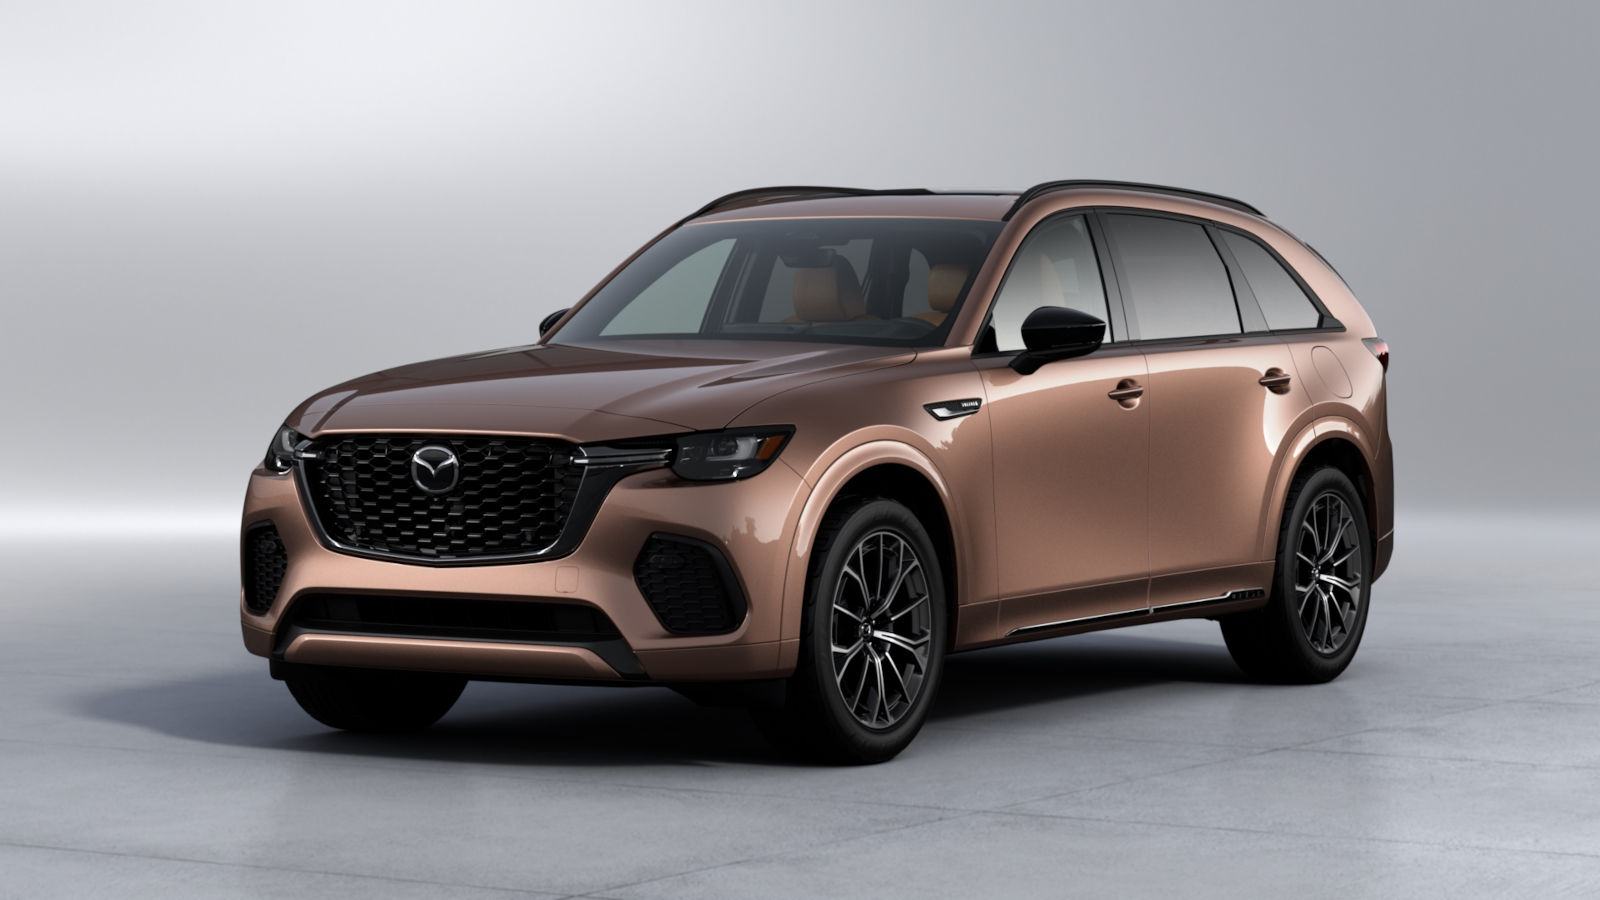 Mazda Offers Versatility With the 2024 CX-90 and 2025 CX-70 SUVs